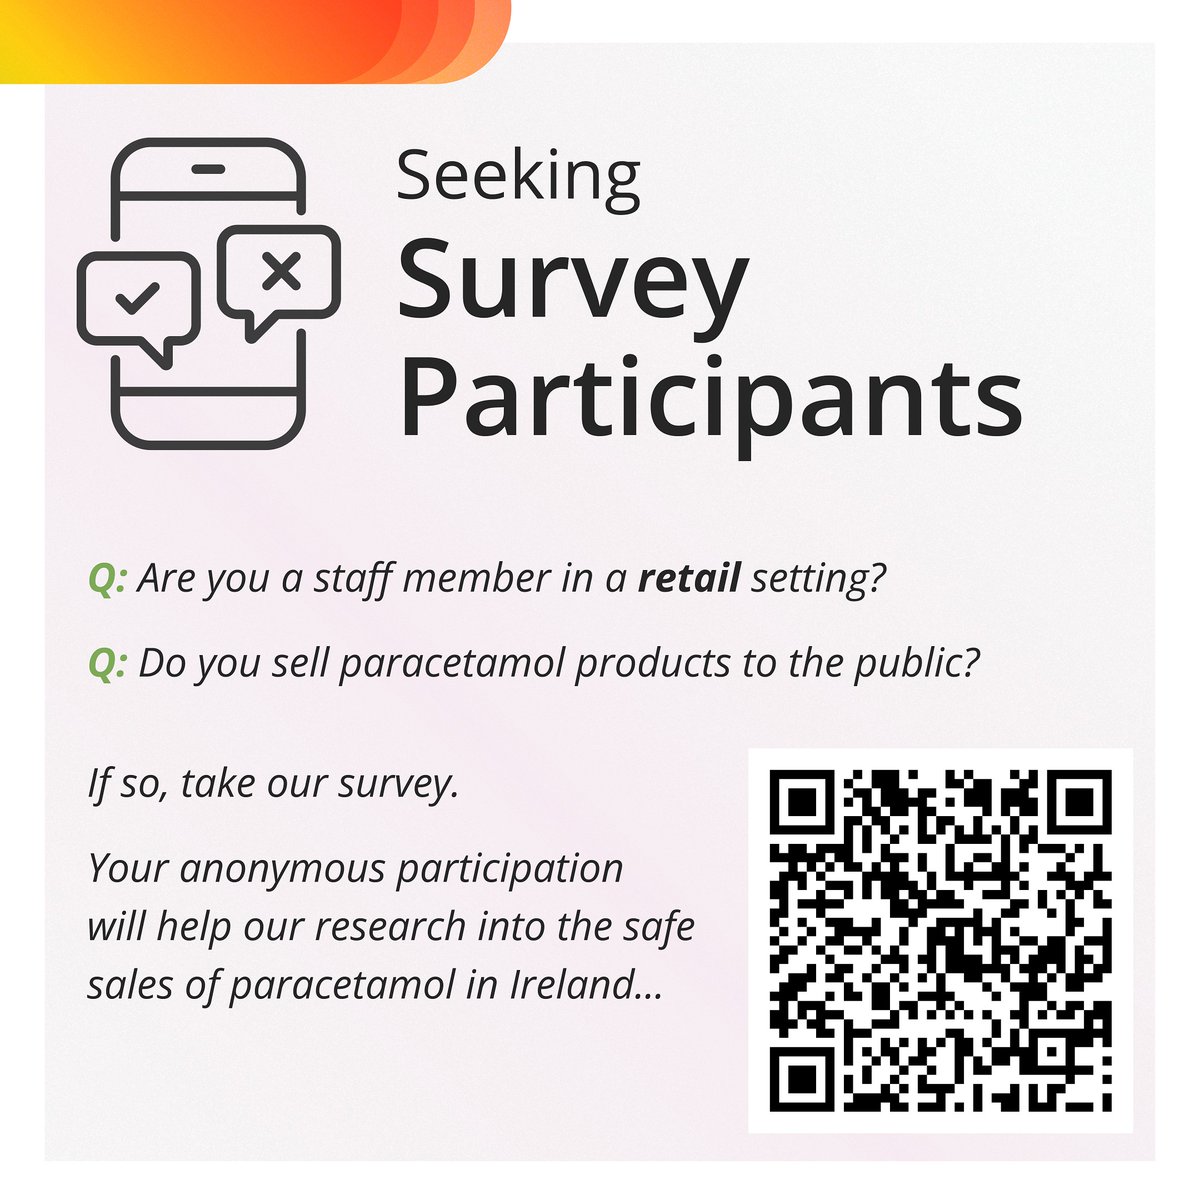 All pharmacy professionals are invited to contribute to critical research on preventing paracetamol-related intentional drug overdoses. Look out for an email with the survey link if you've consented to receive research updates. #ConnectingforLife #MedicationSafety